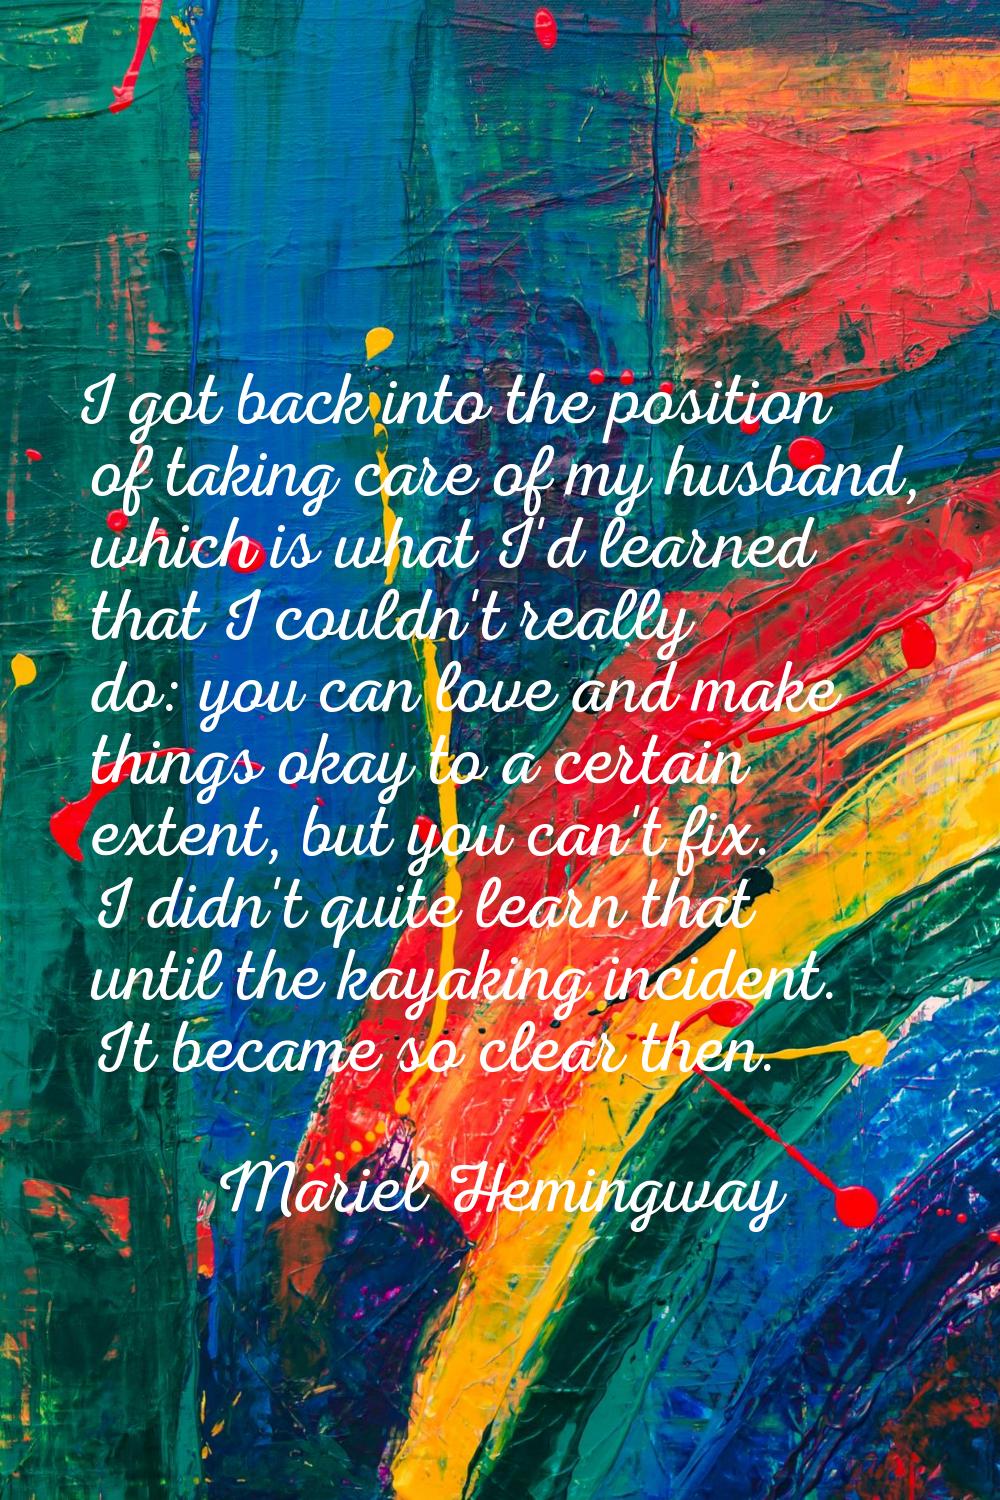 I got back into the position of taking care of my husband, which is what I'd learned that I couldn'